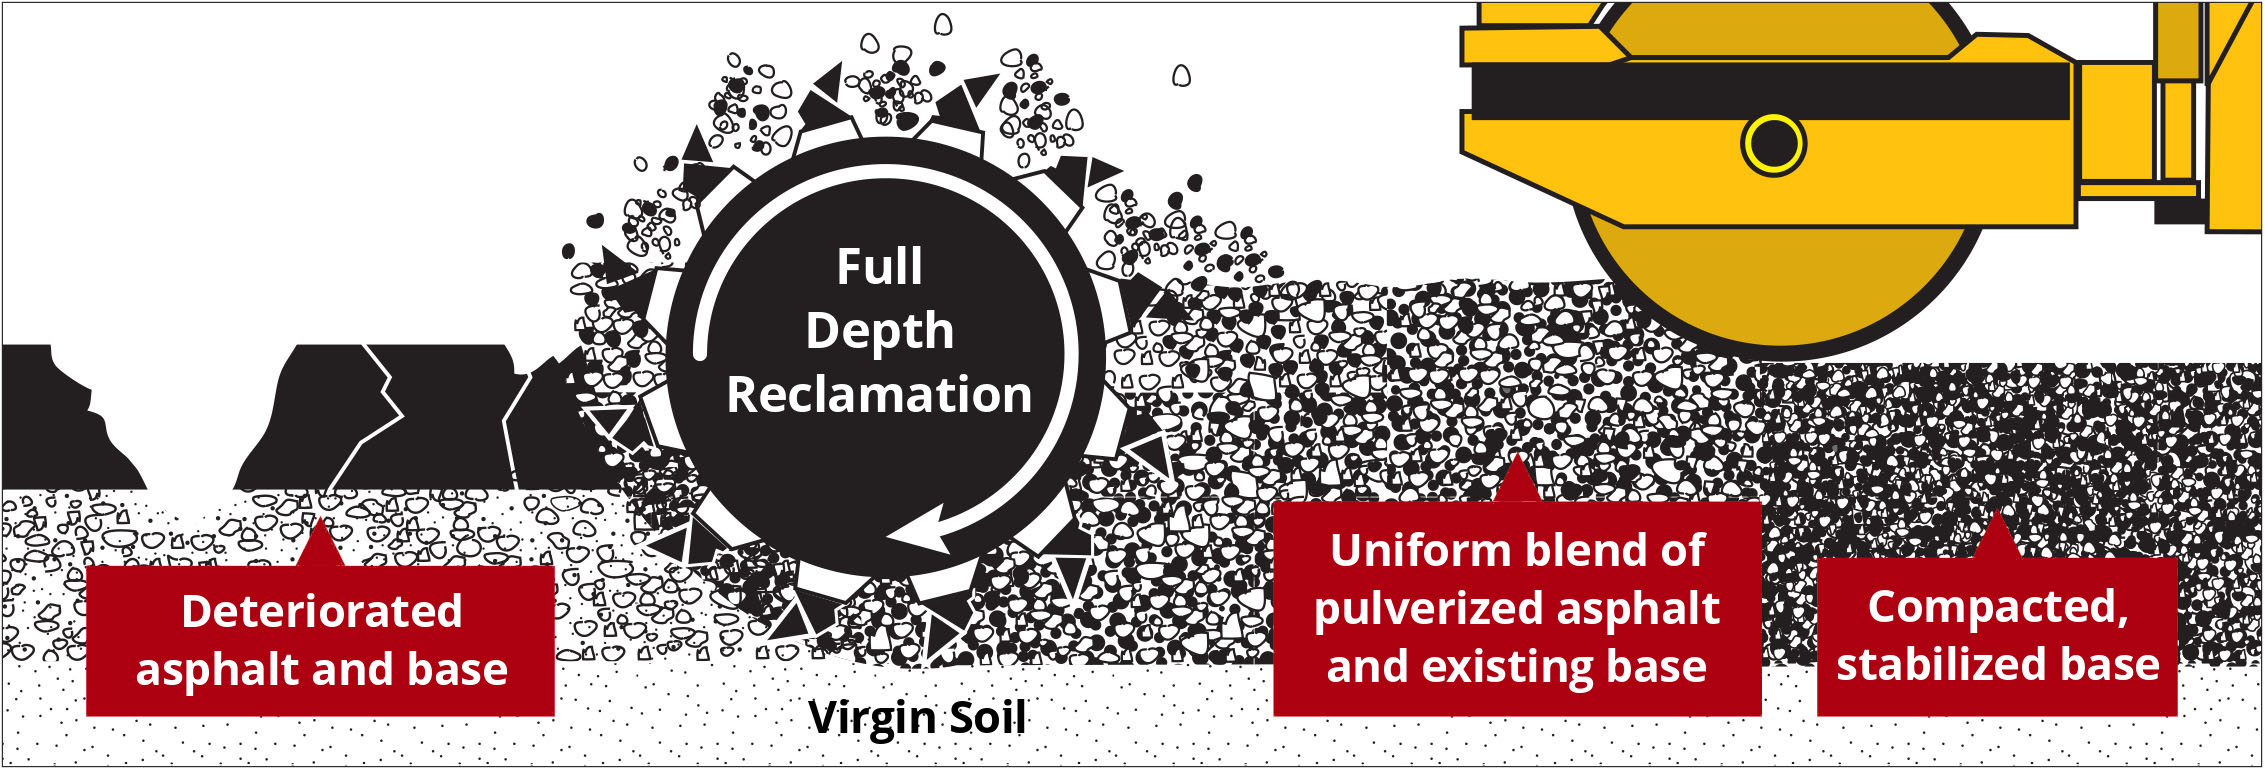 Full-Depth Reclamation Lifecycle